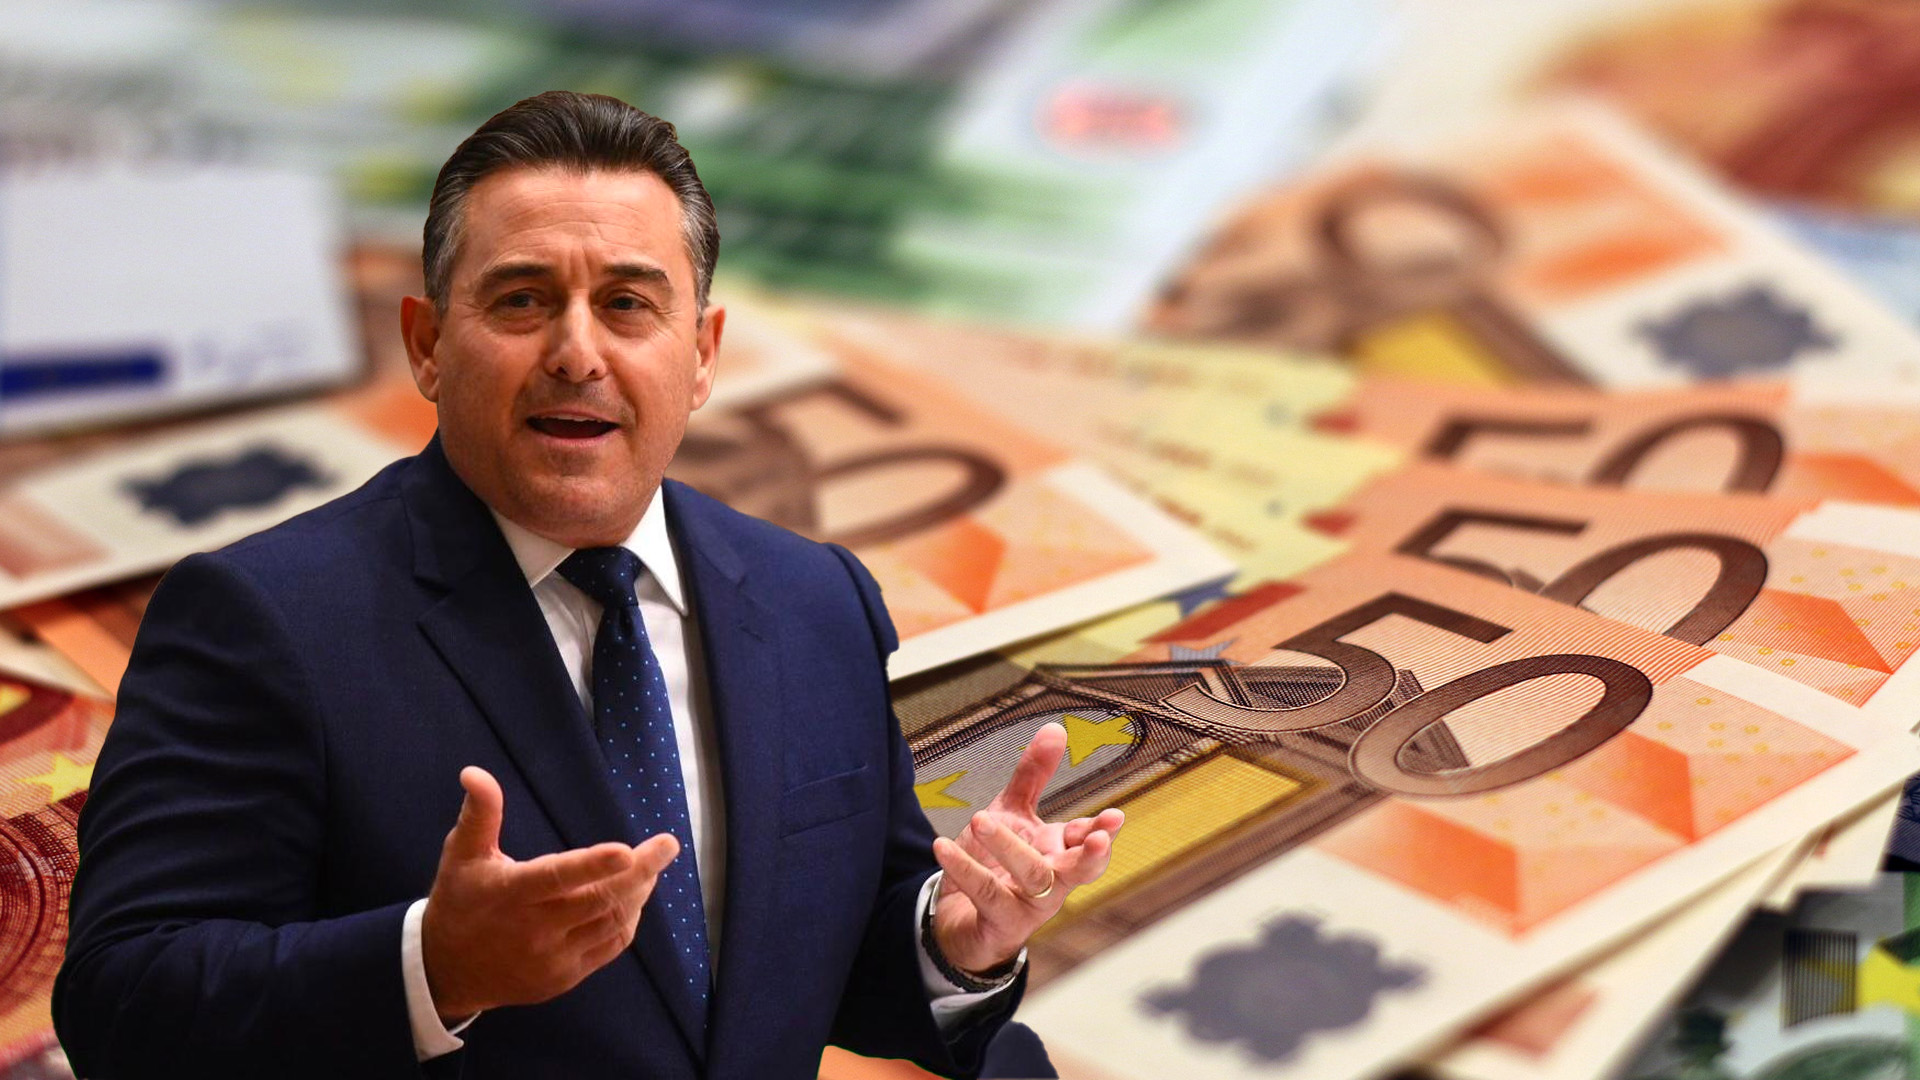 PN Pledges to Tackle Malta's €10 Billion Debt: "More Than All Other Finance Minister Combined"